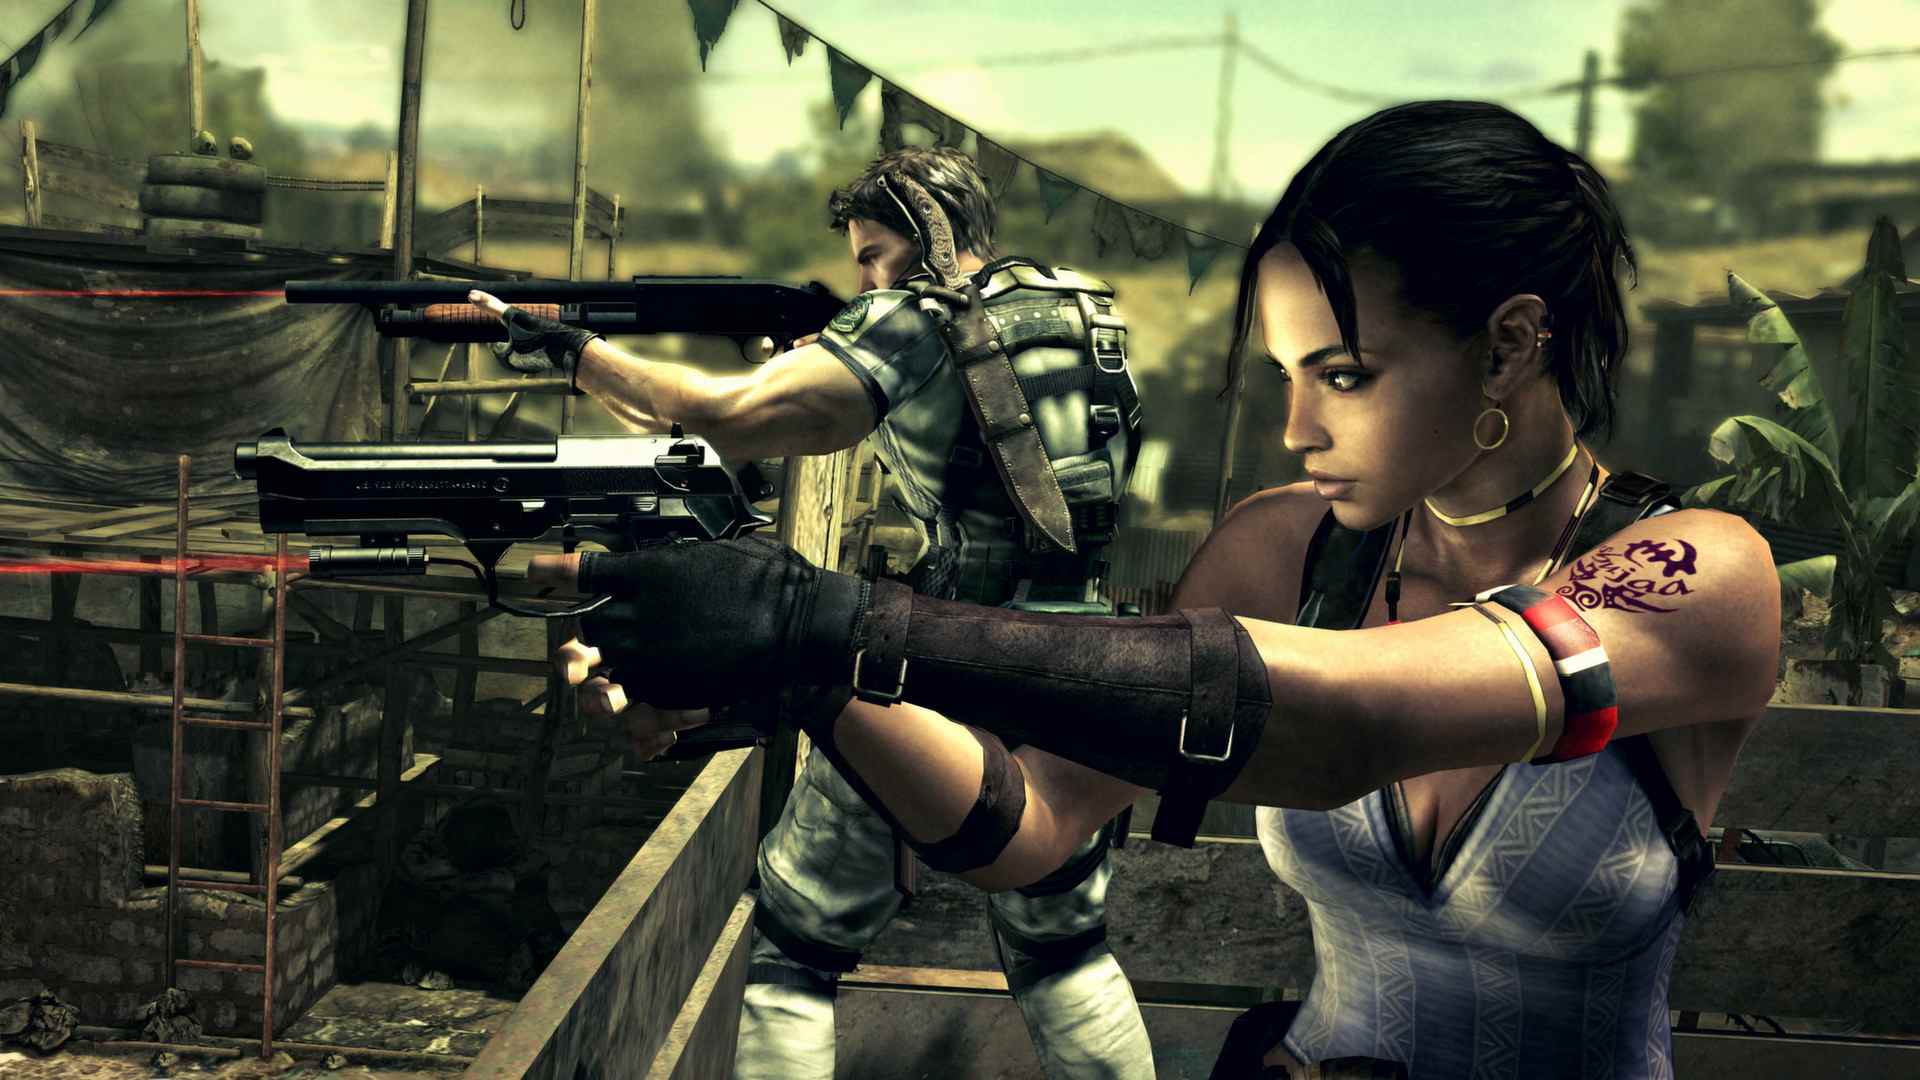 Resident Evil 5 being racist is a false narrative.